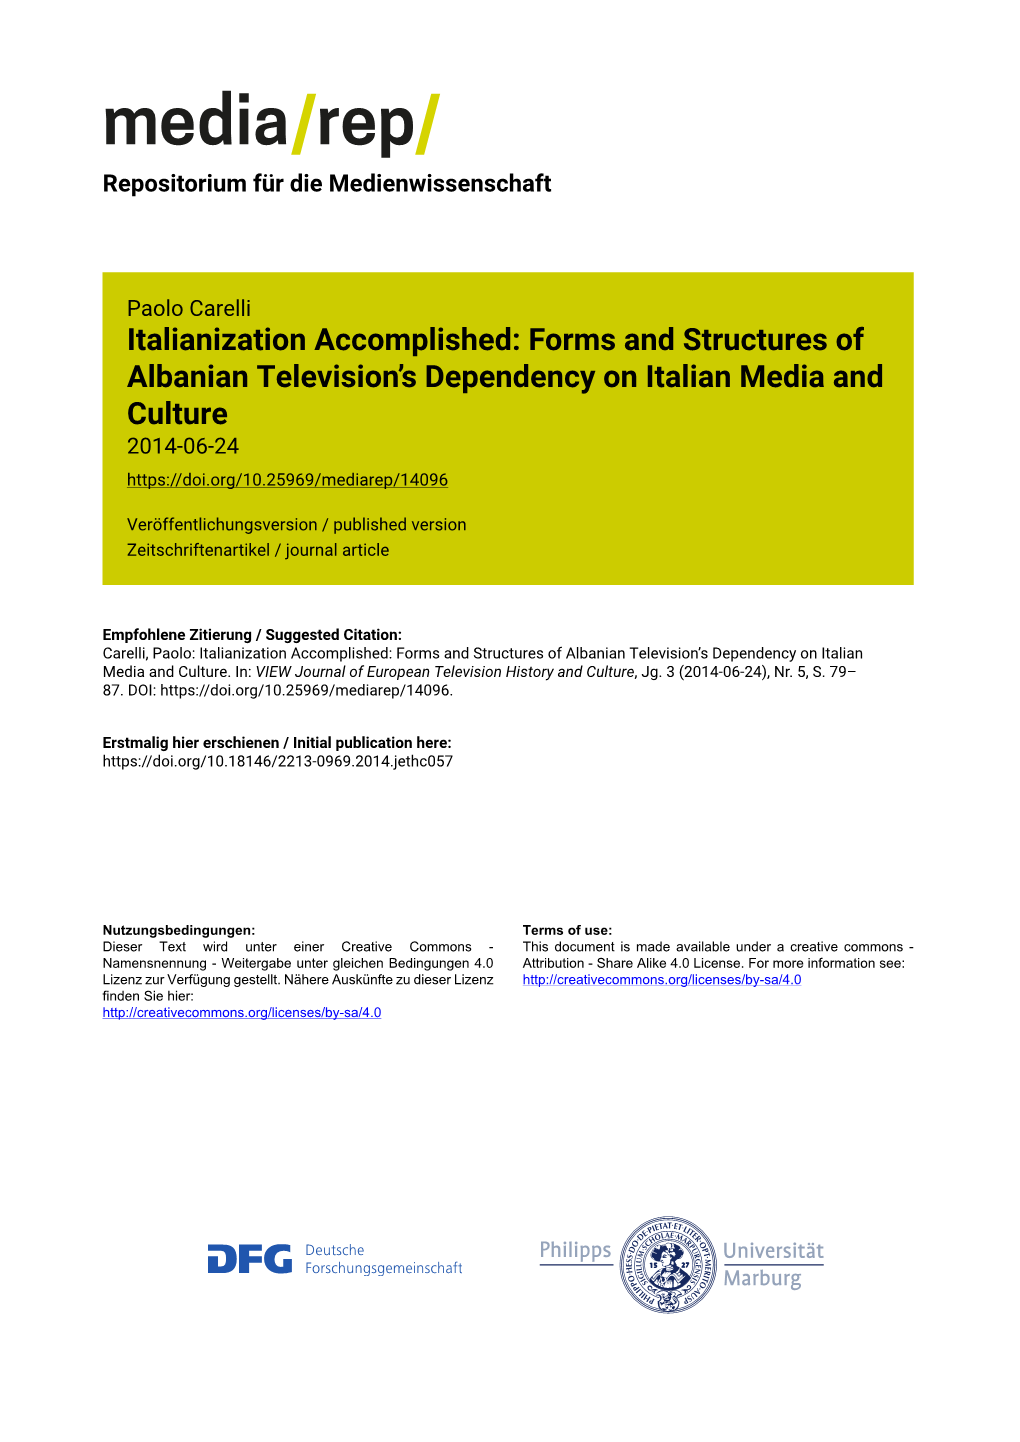 Italianization Accomplished: Forms and Structures of Albanian Television's Dependency on Italian Media and Culture